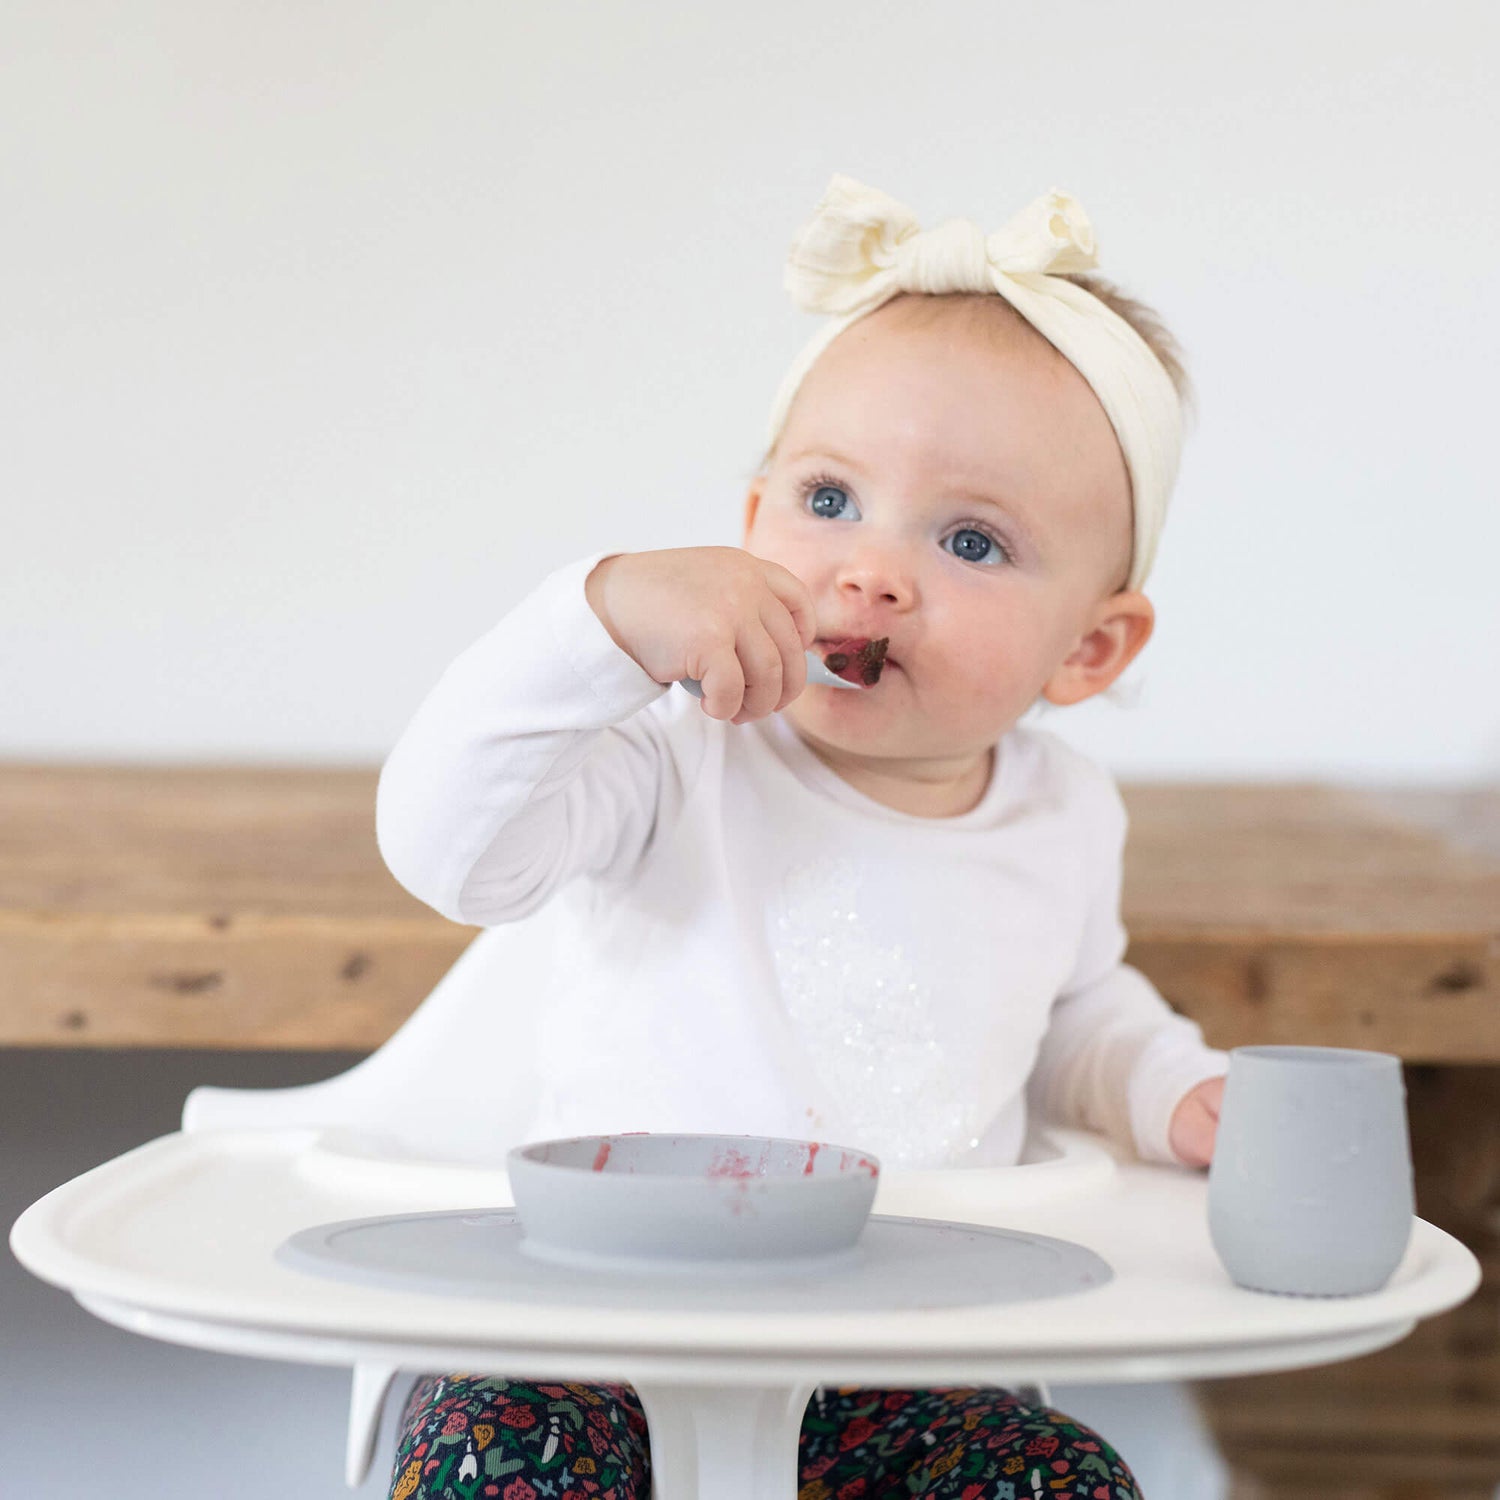 The Tiny Spoon in Pewter by ezpz / Small, Sensory Silicone Spoon for Babies